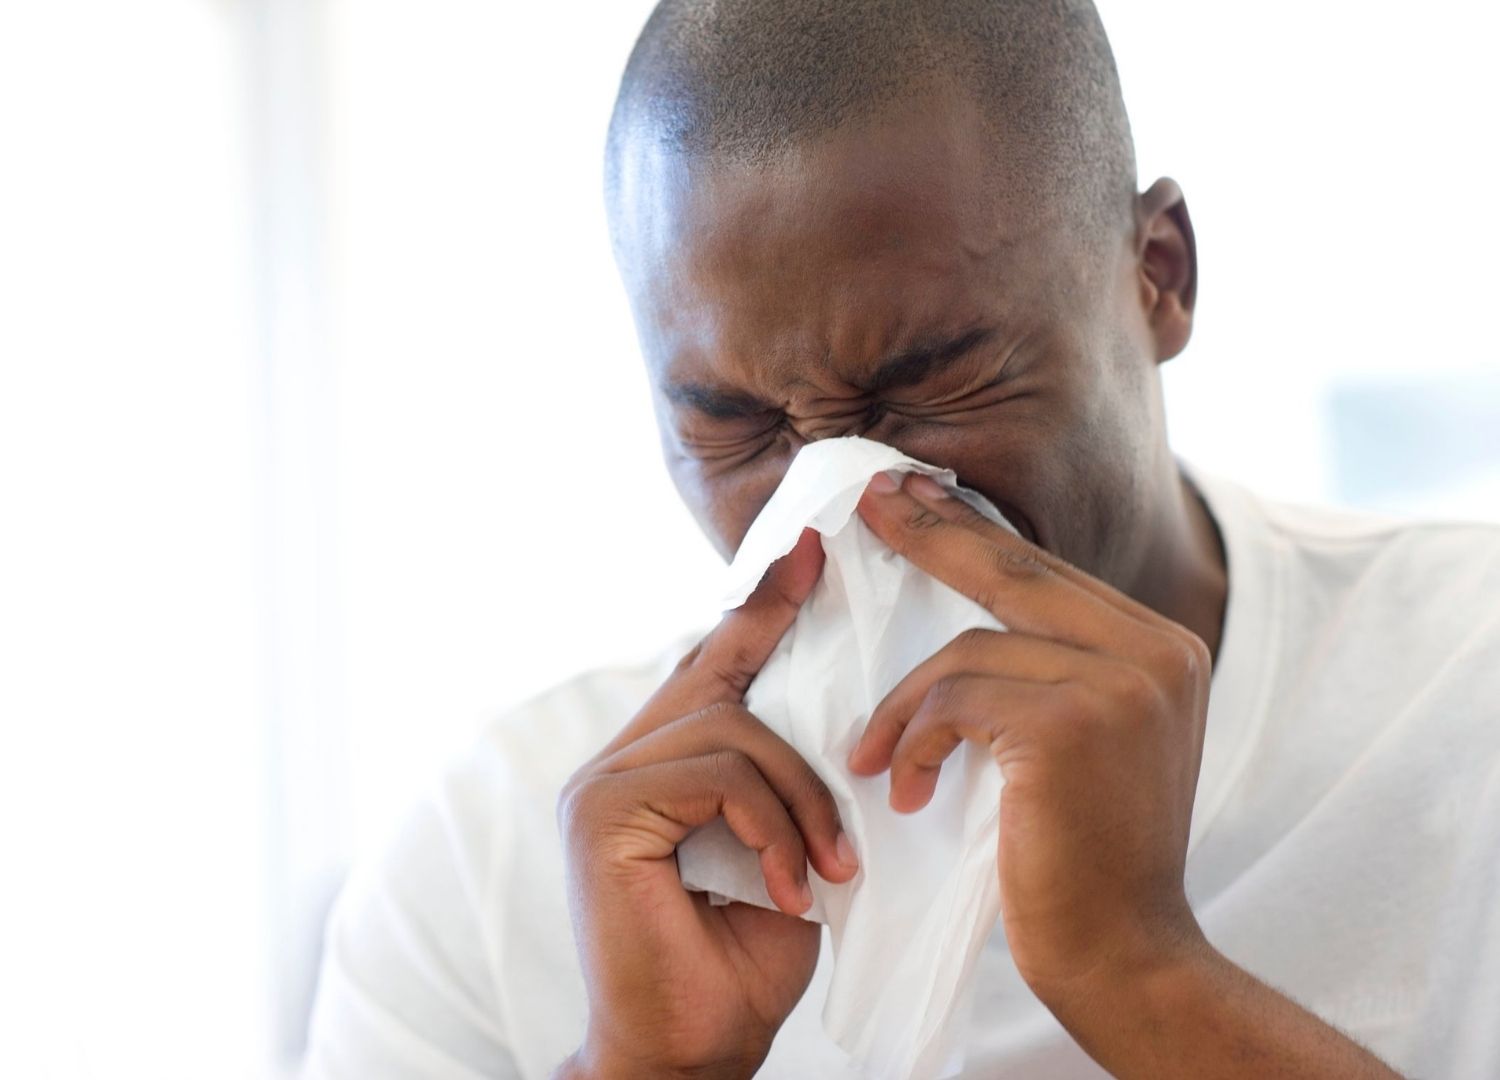 Allergic Rhinitis: A Runny Nose that Won’t Leave Me Alone